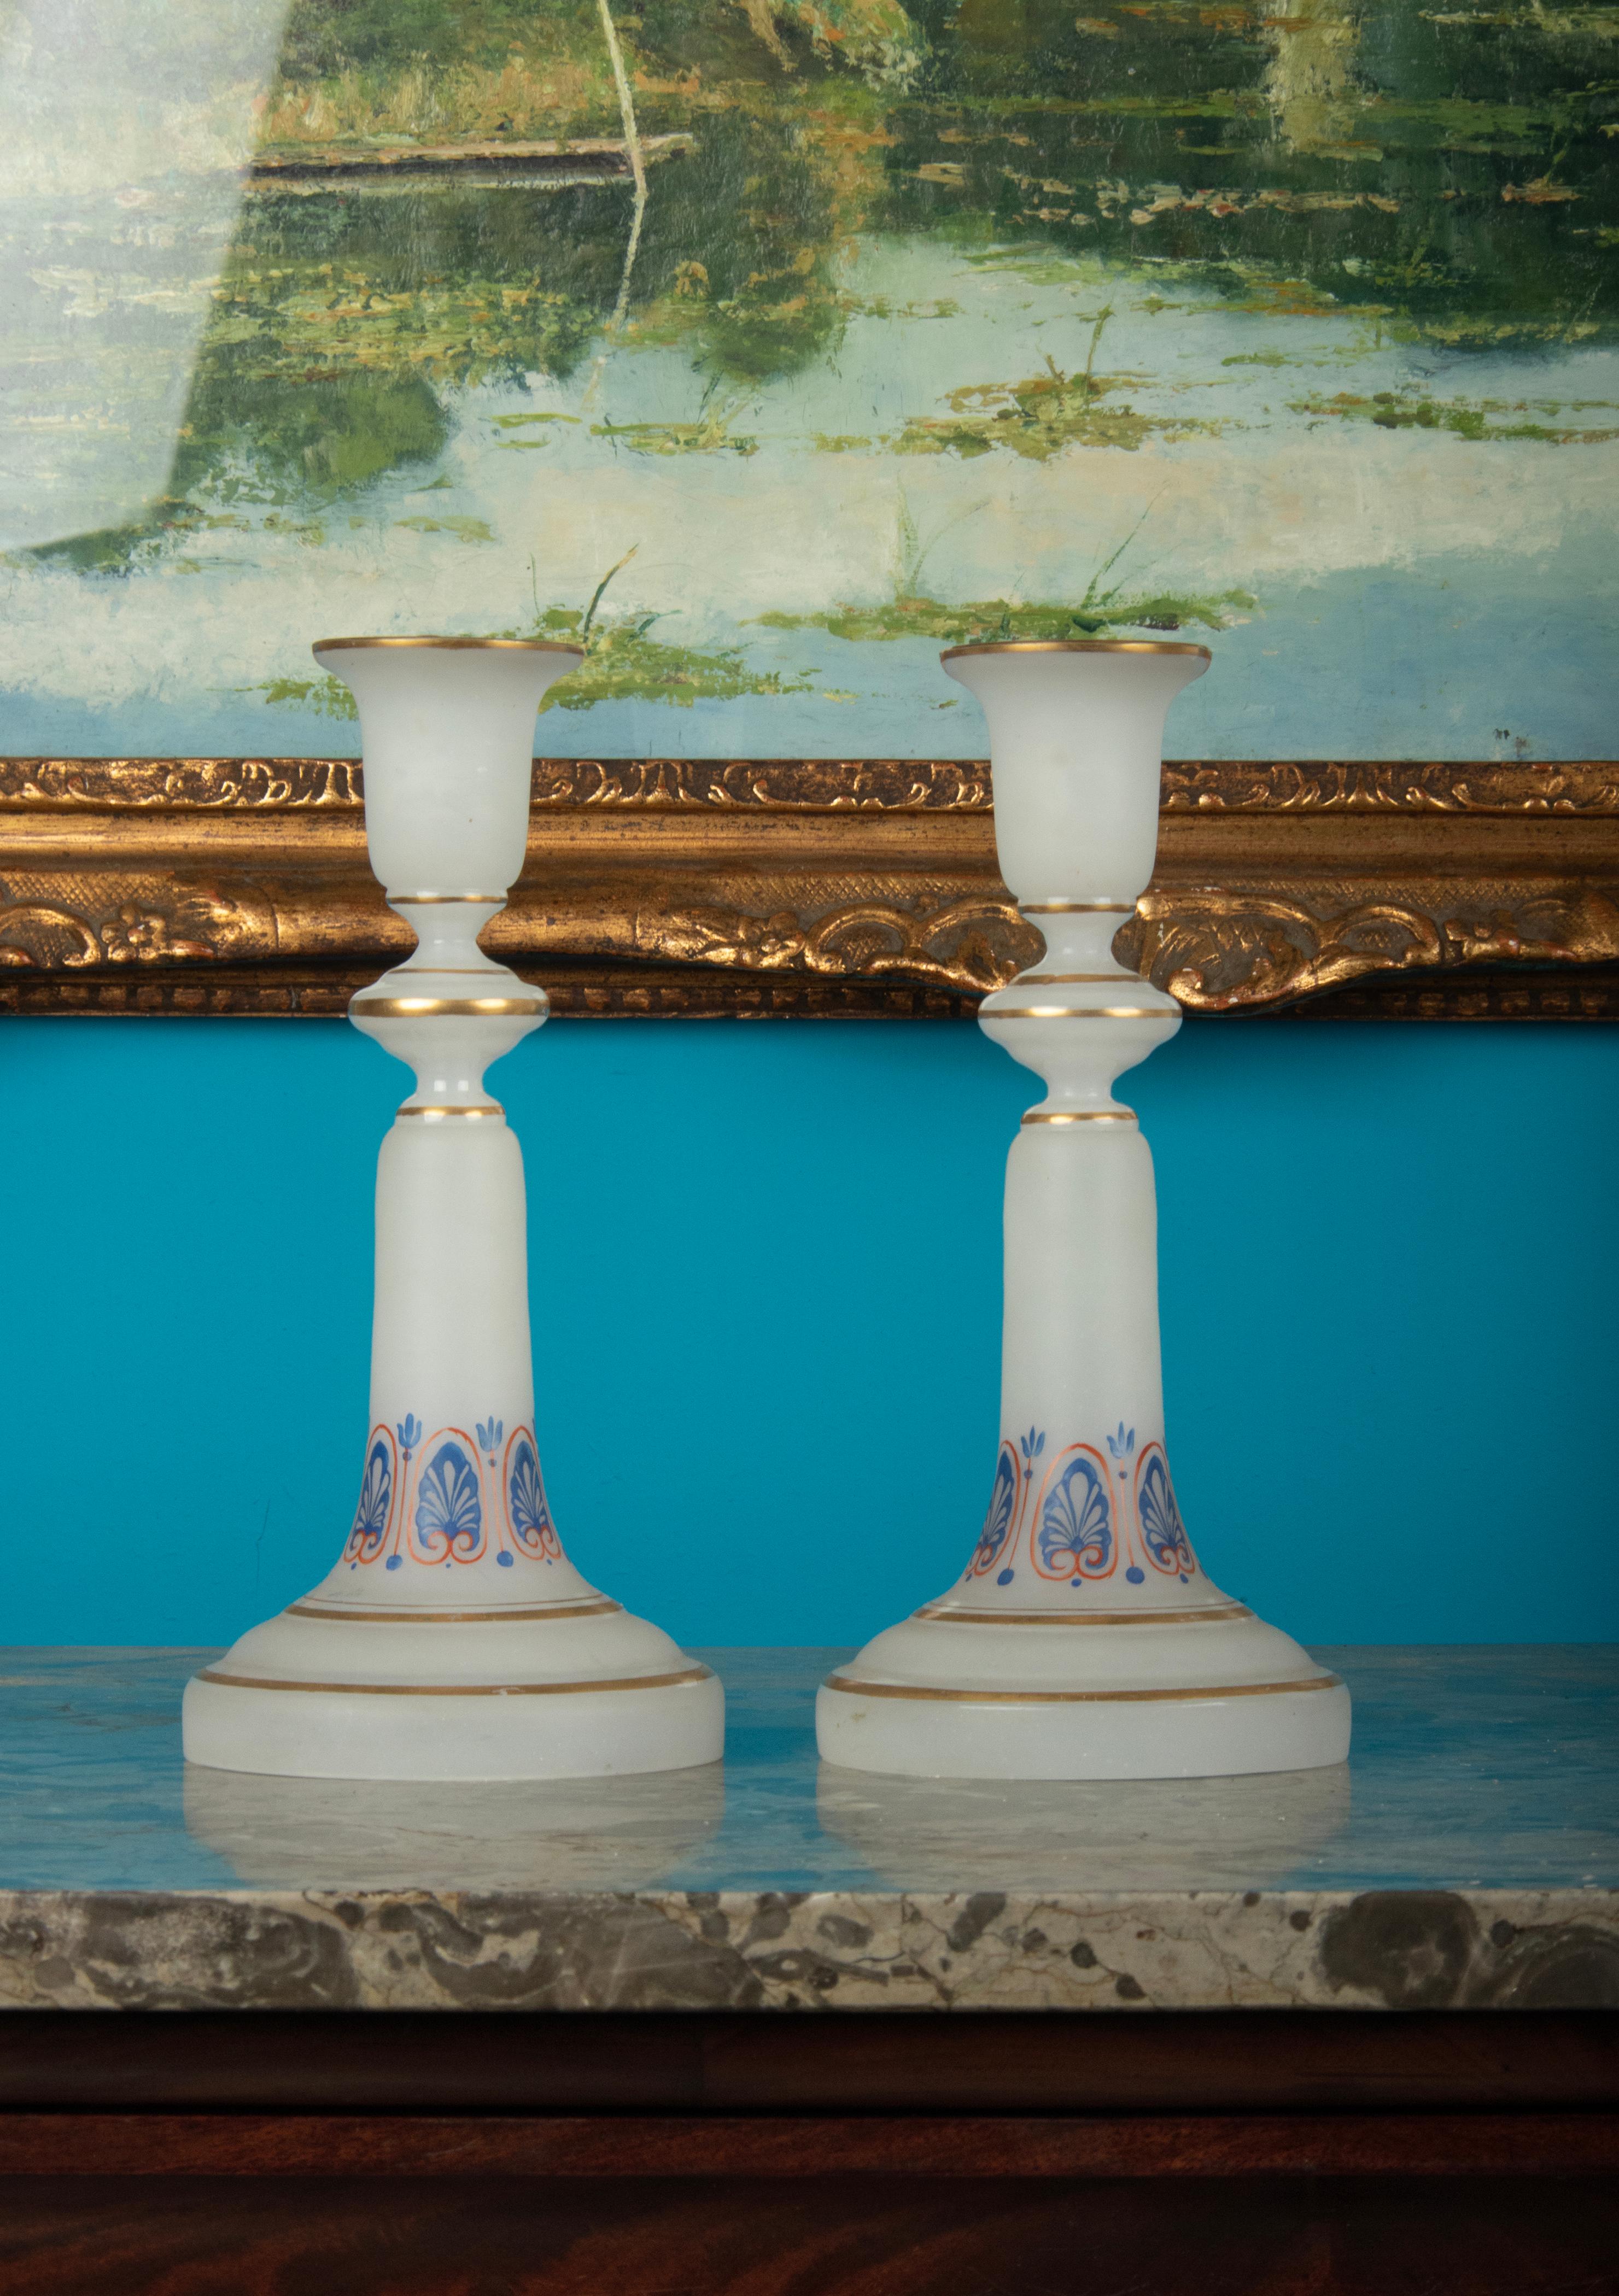 A beautiful pair of candlesticks, made of satined, matted opaline glass. Hand painted with gold colored edges and gothic motifs. The candlesticks are in good condition, the decorations are still nicely intact.